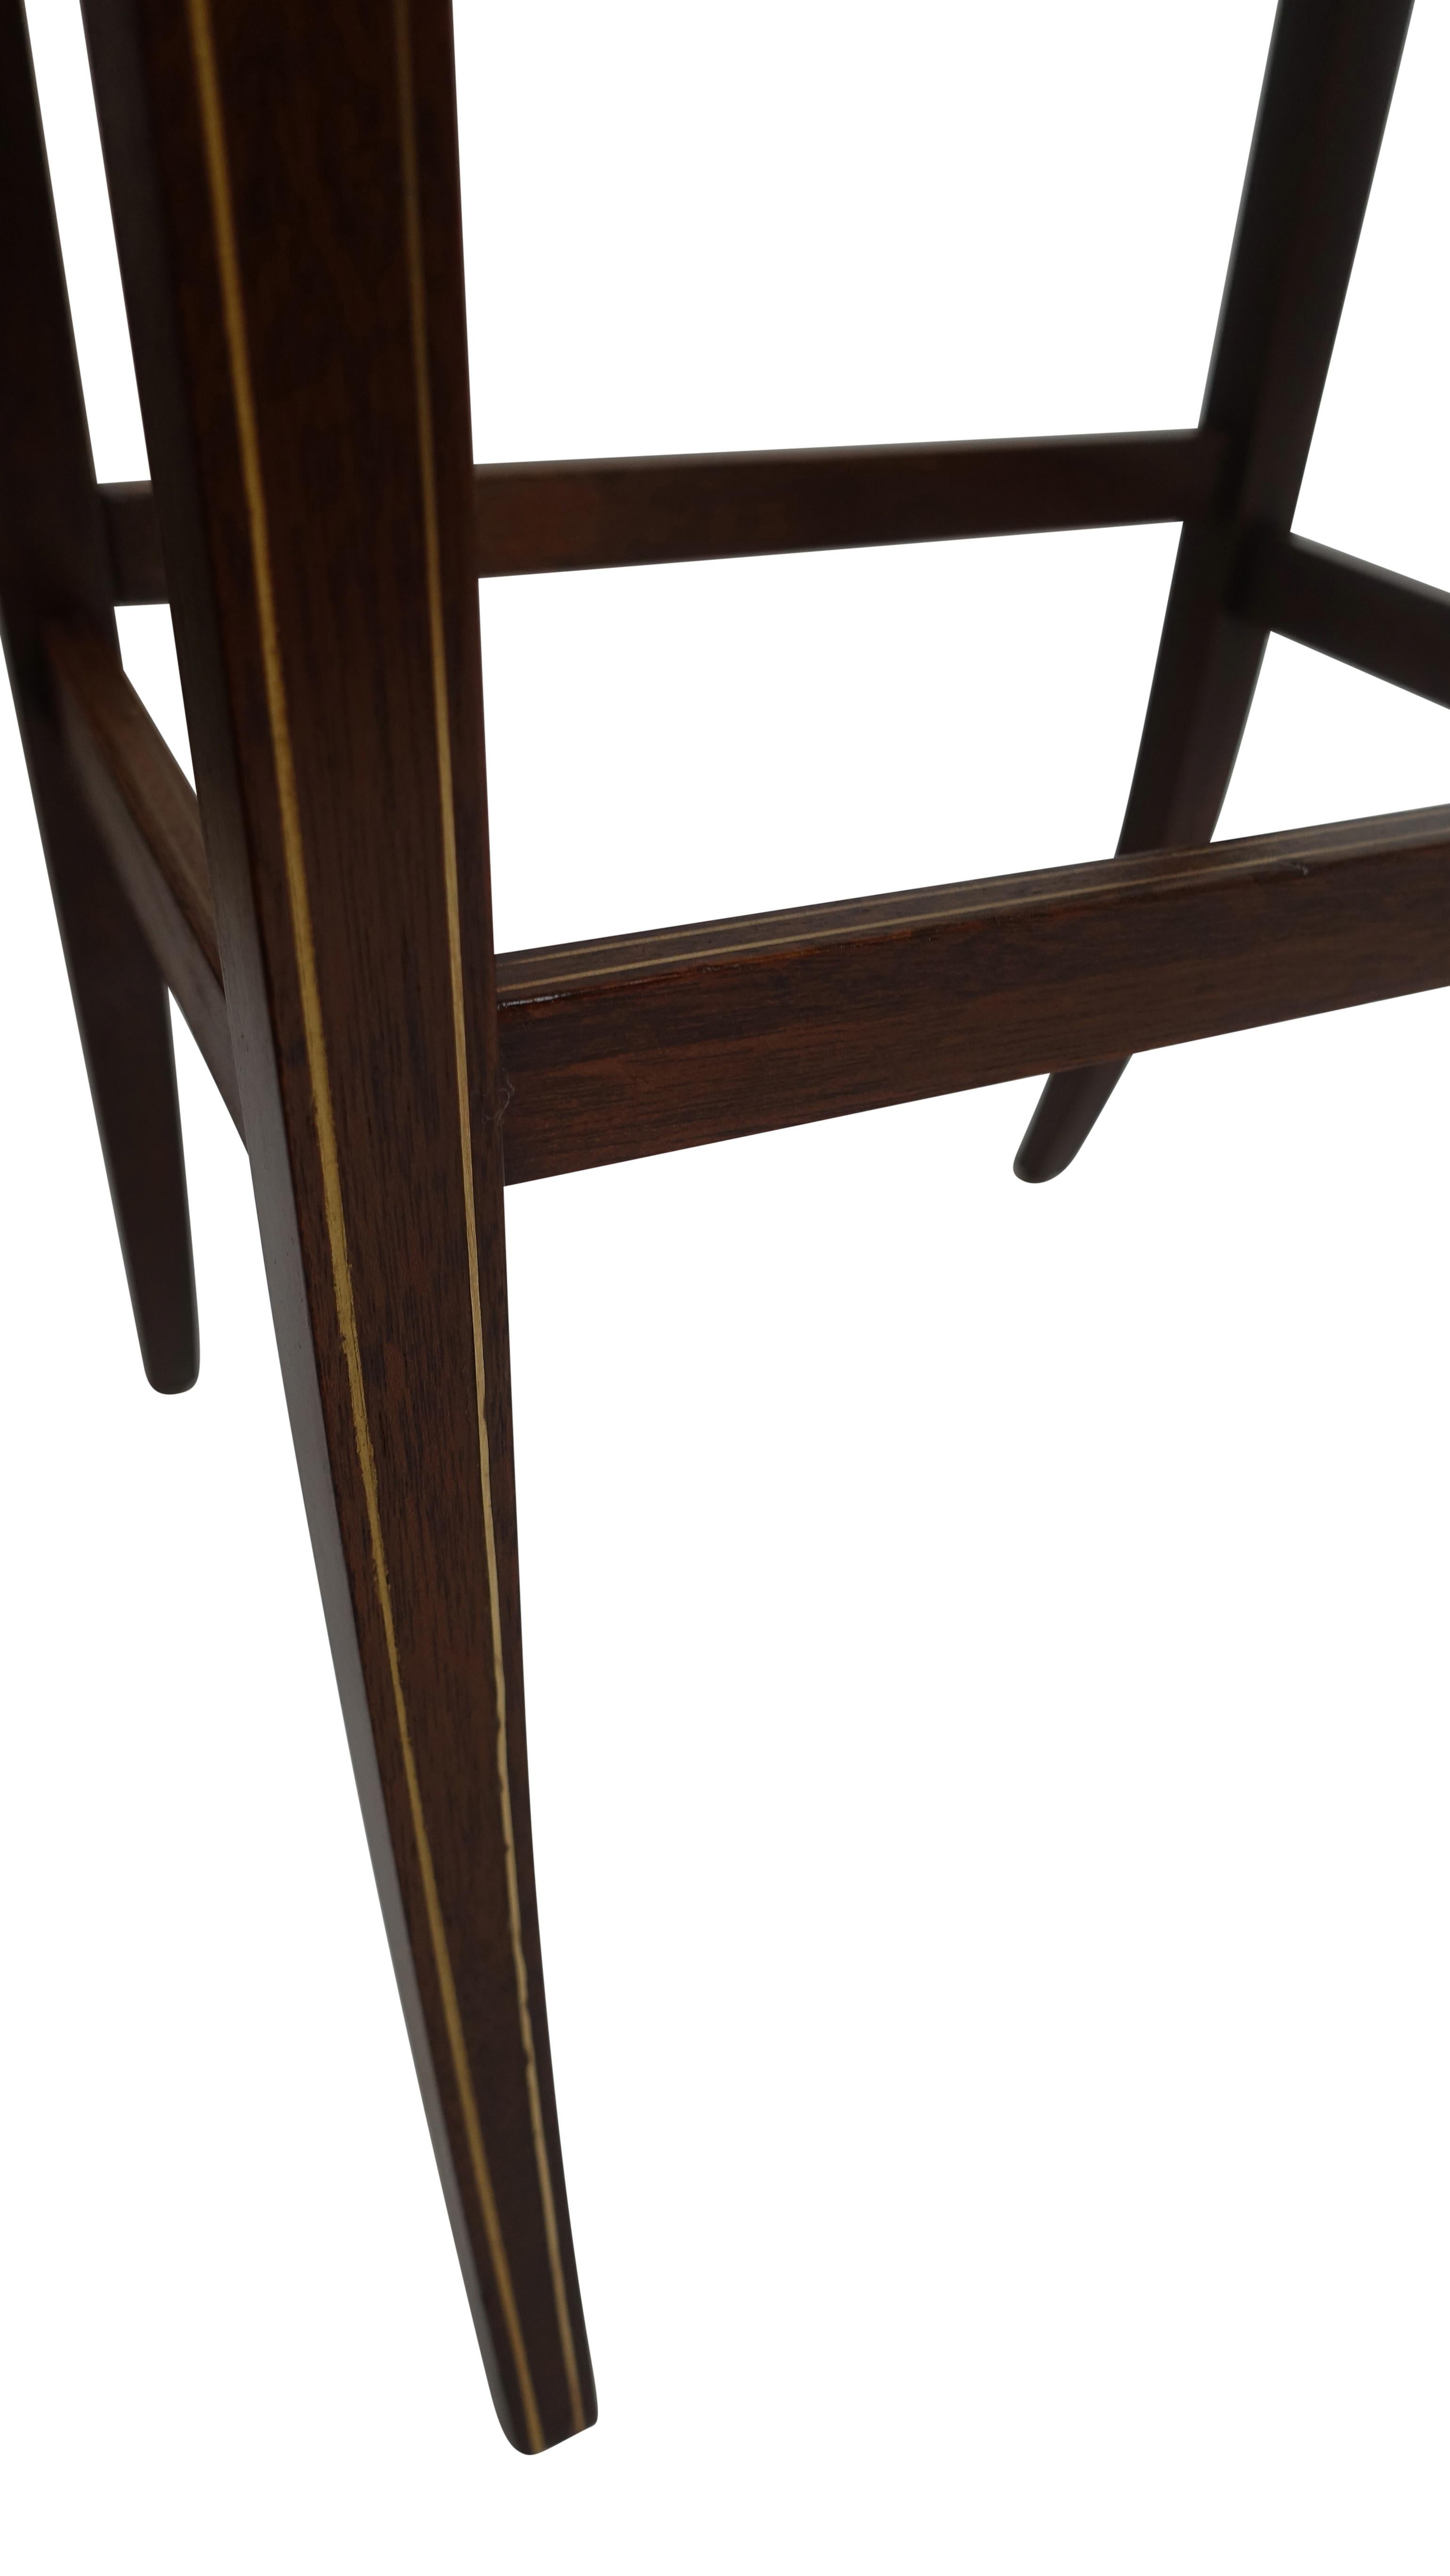 Set of Four Mahogany Nesting Tables with Brass Inlay and Trim, Mid-20th Century For Sale 1